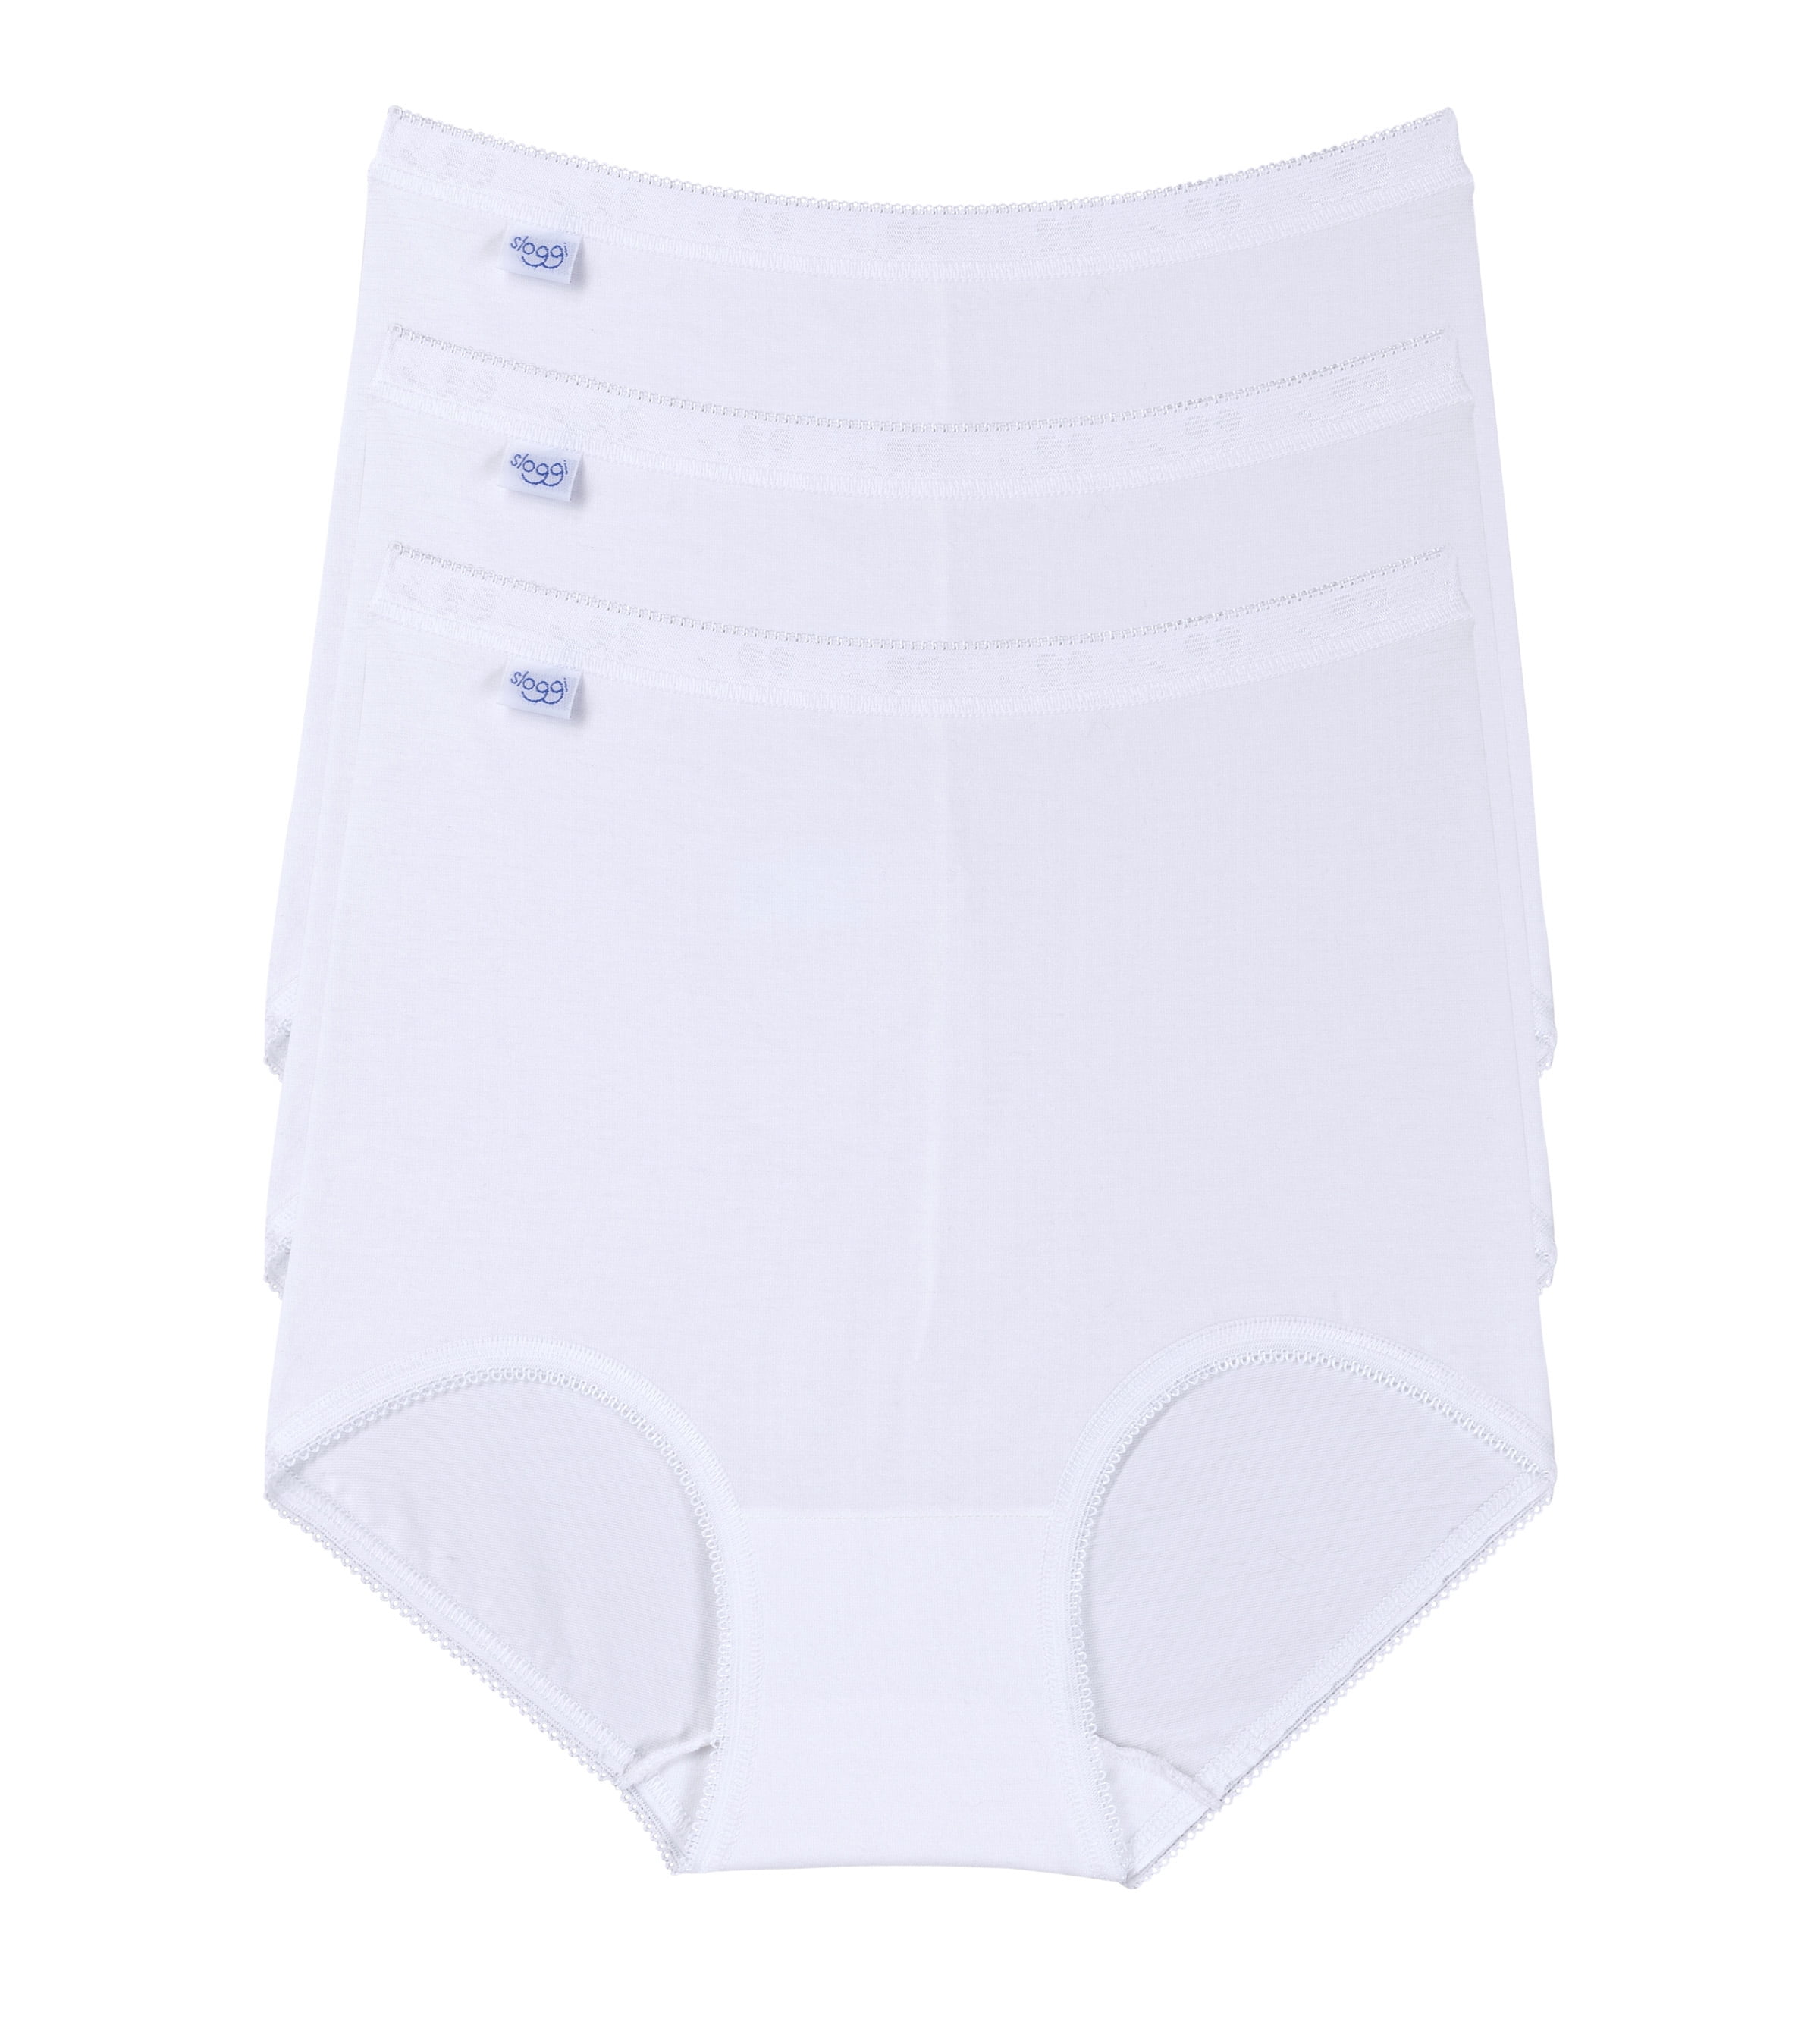 Sloggi High Waisted Control Maxi Lady Seamless Cotton Underwear or Panties  (White, 2XL, 2 Pack) 